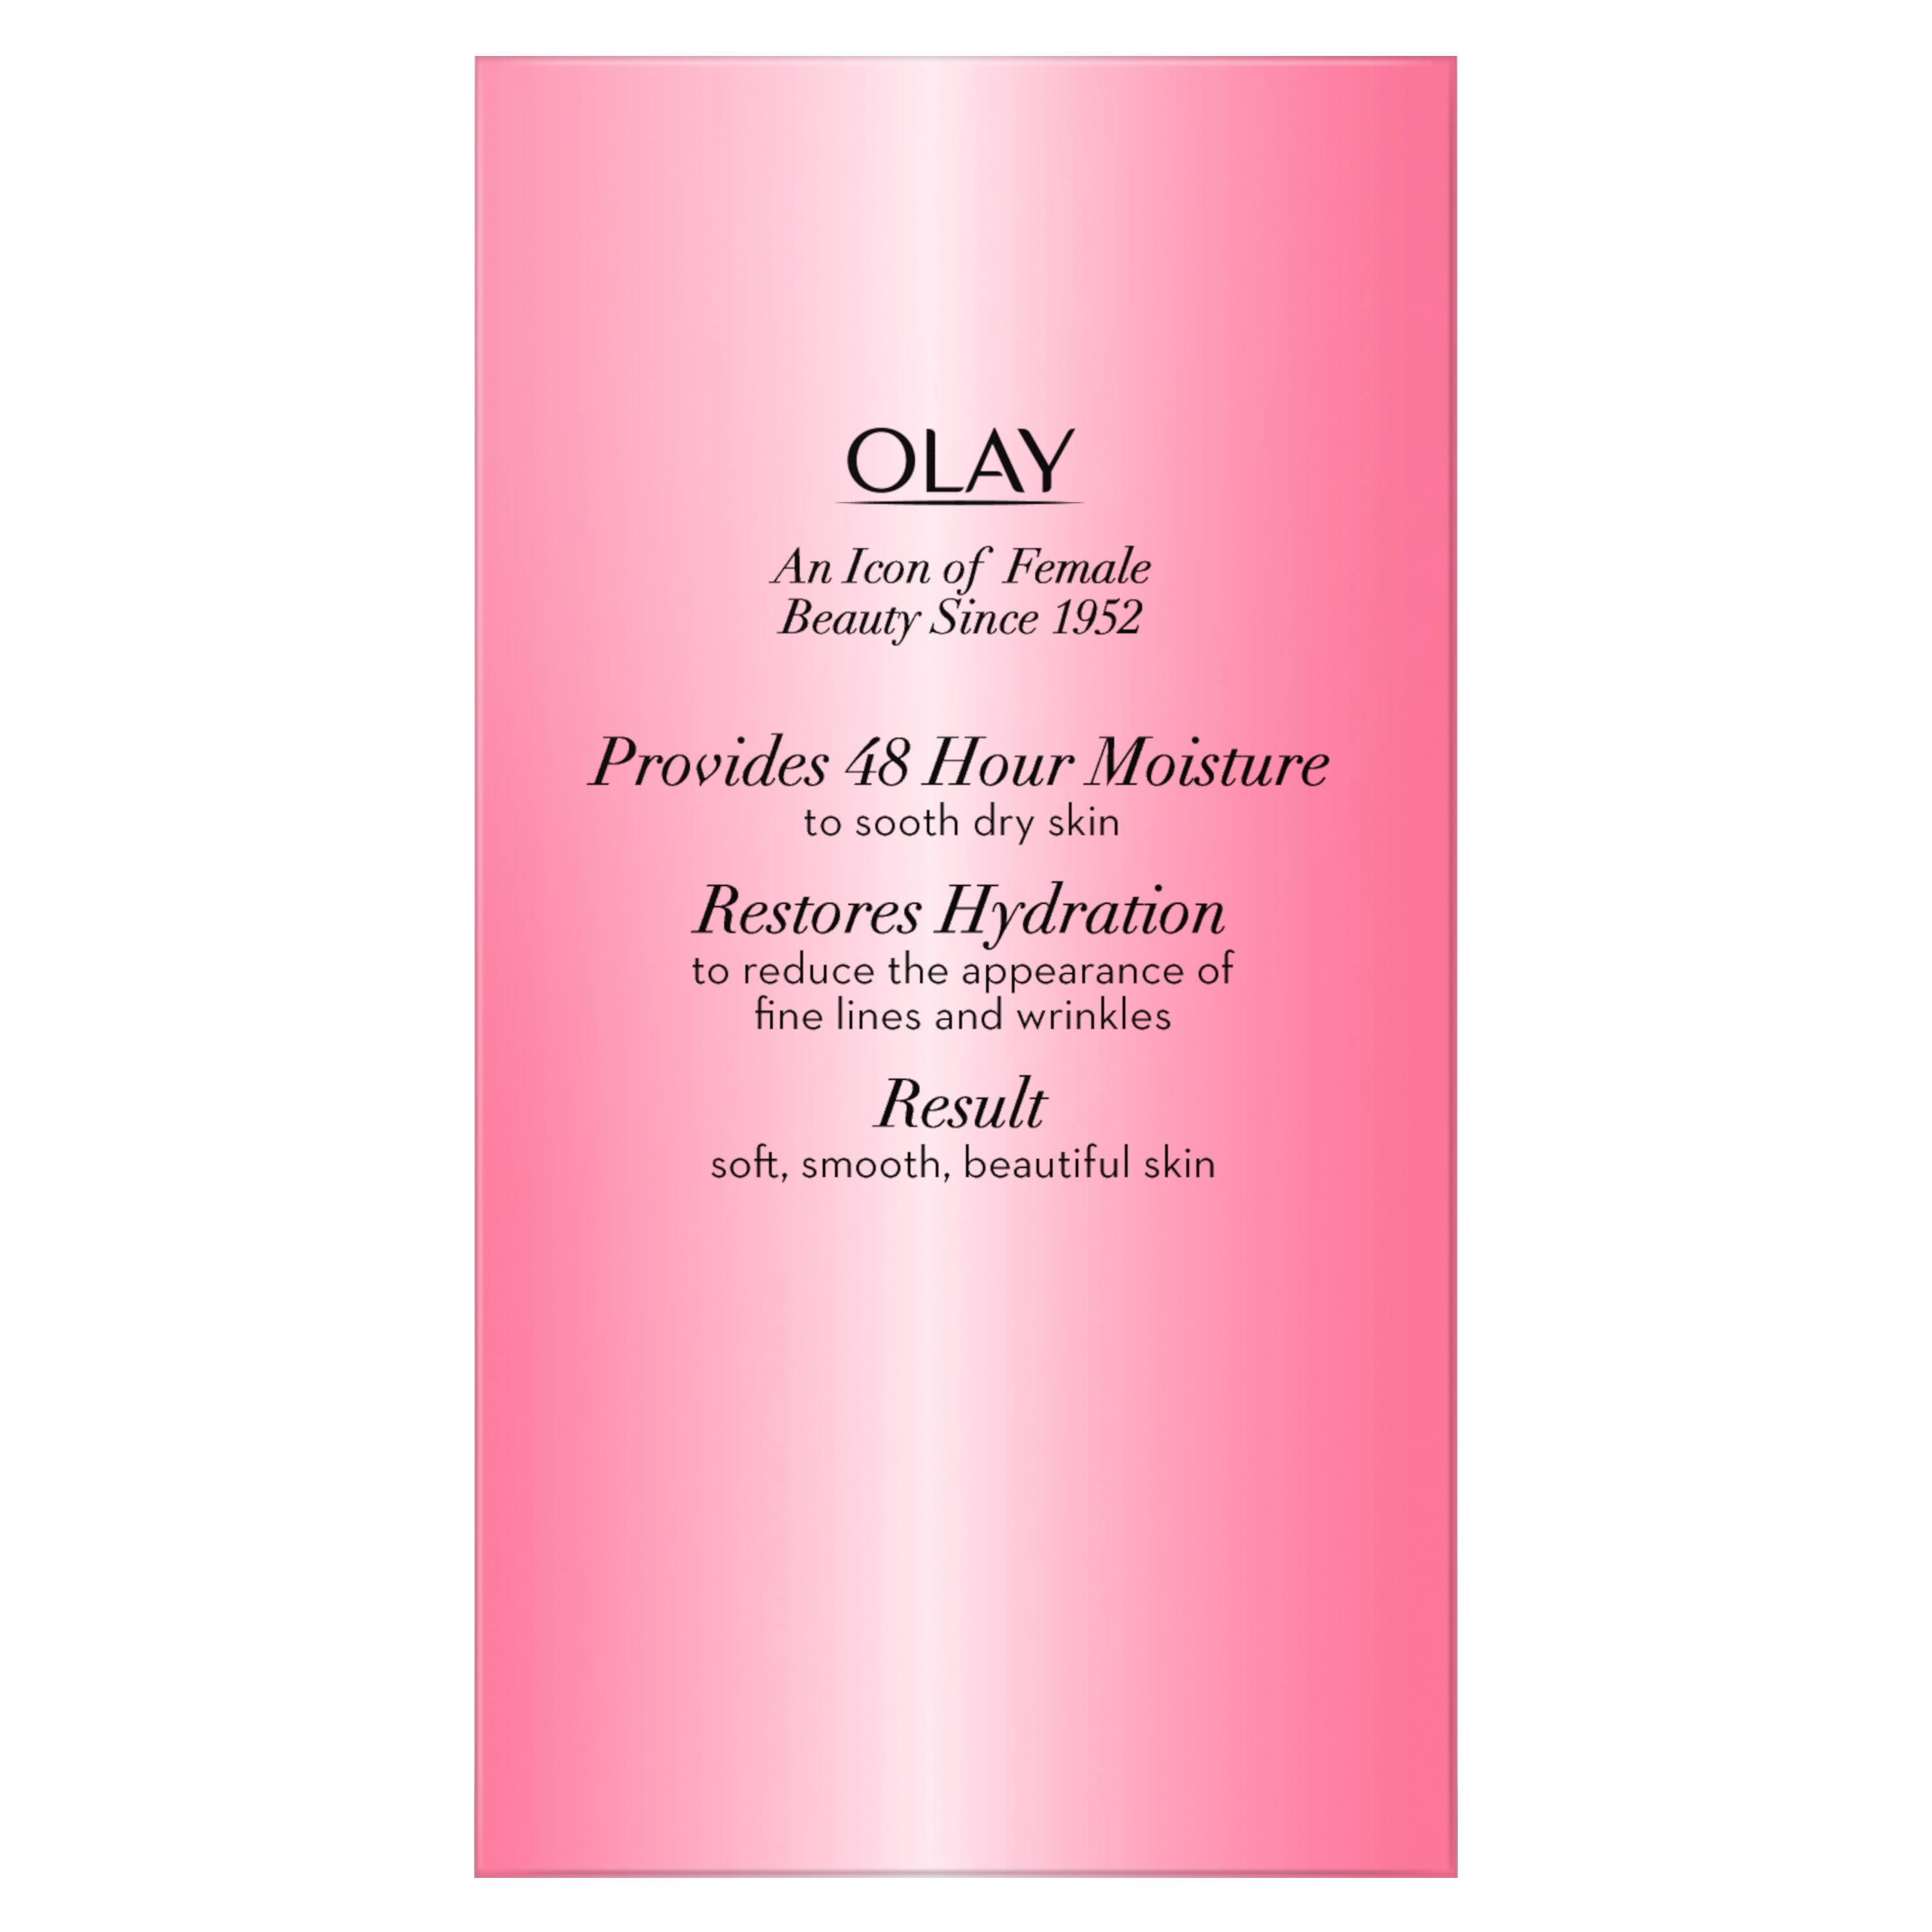 Olay Skincare Active Hydrating Beauty Facial Moisturizing Lotion, All Skin Types, 6 fl oz - image 2 of 8